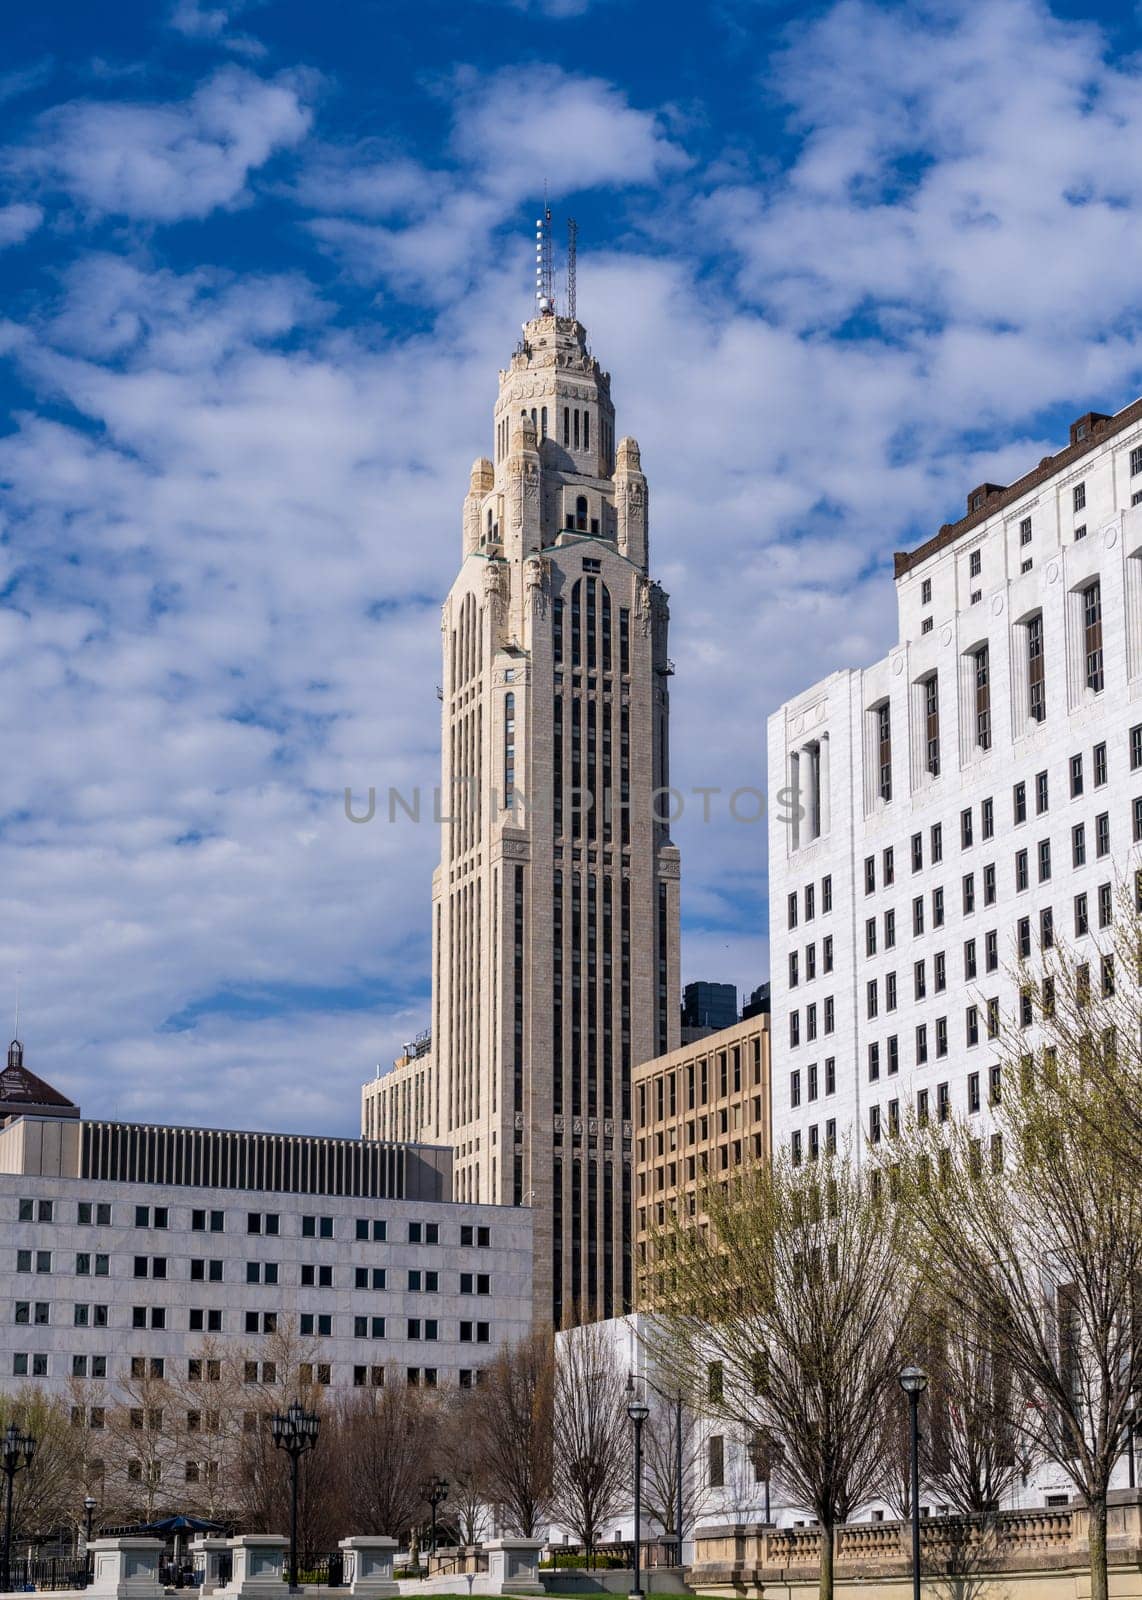 The LeVeque tower was tallest in Columbus OH when built in 1927 by steheap